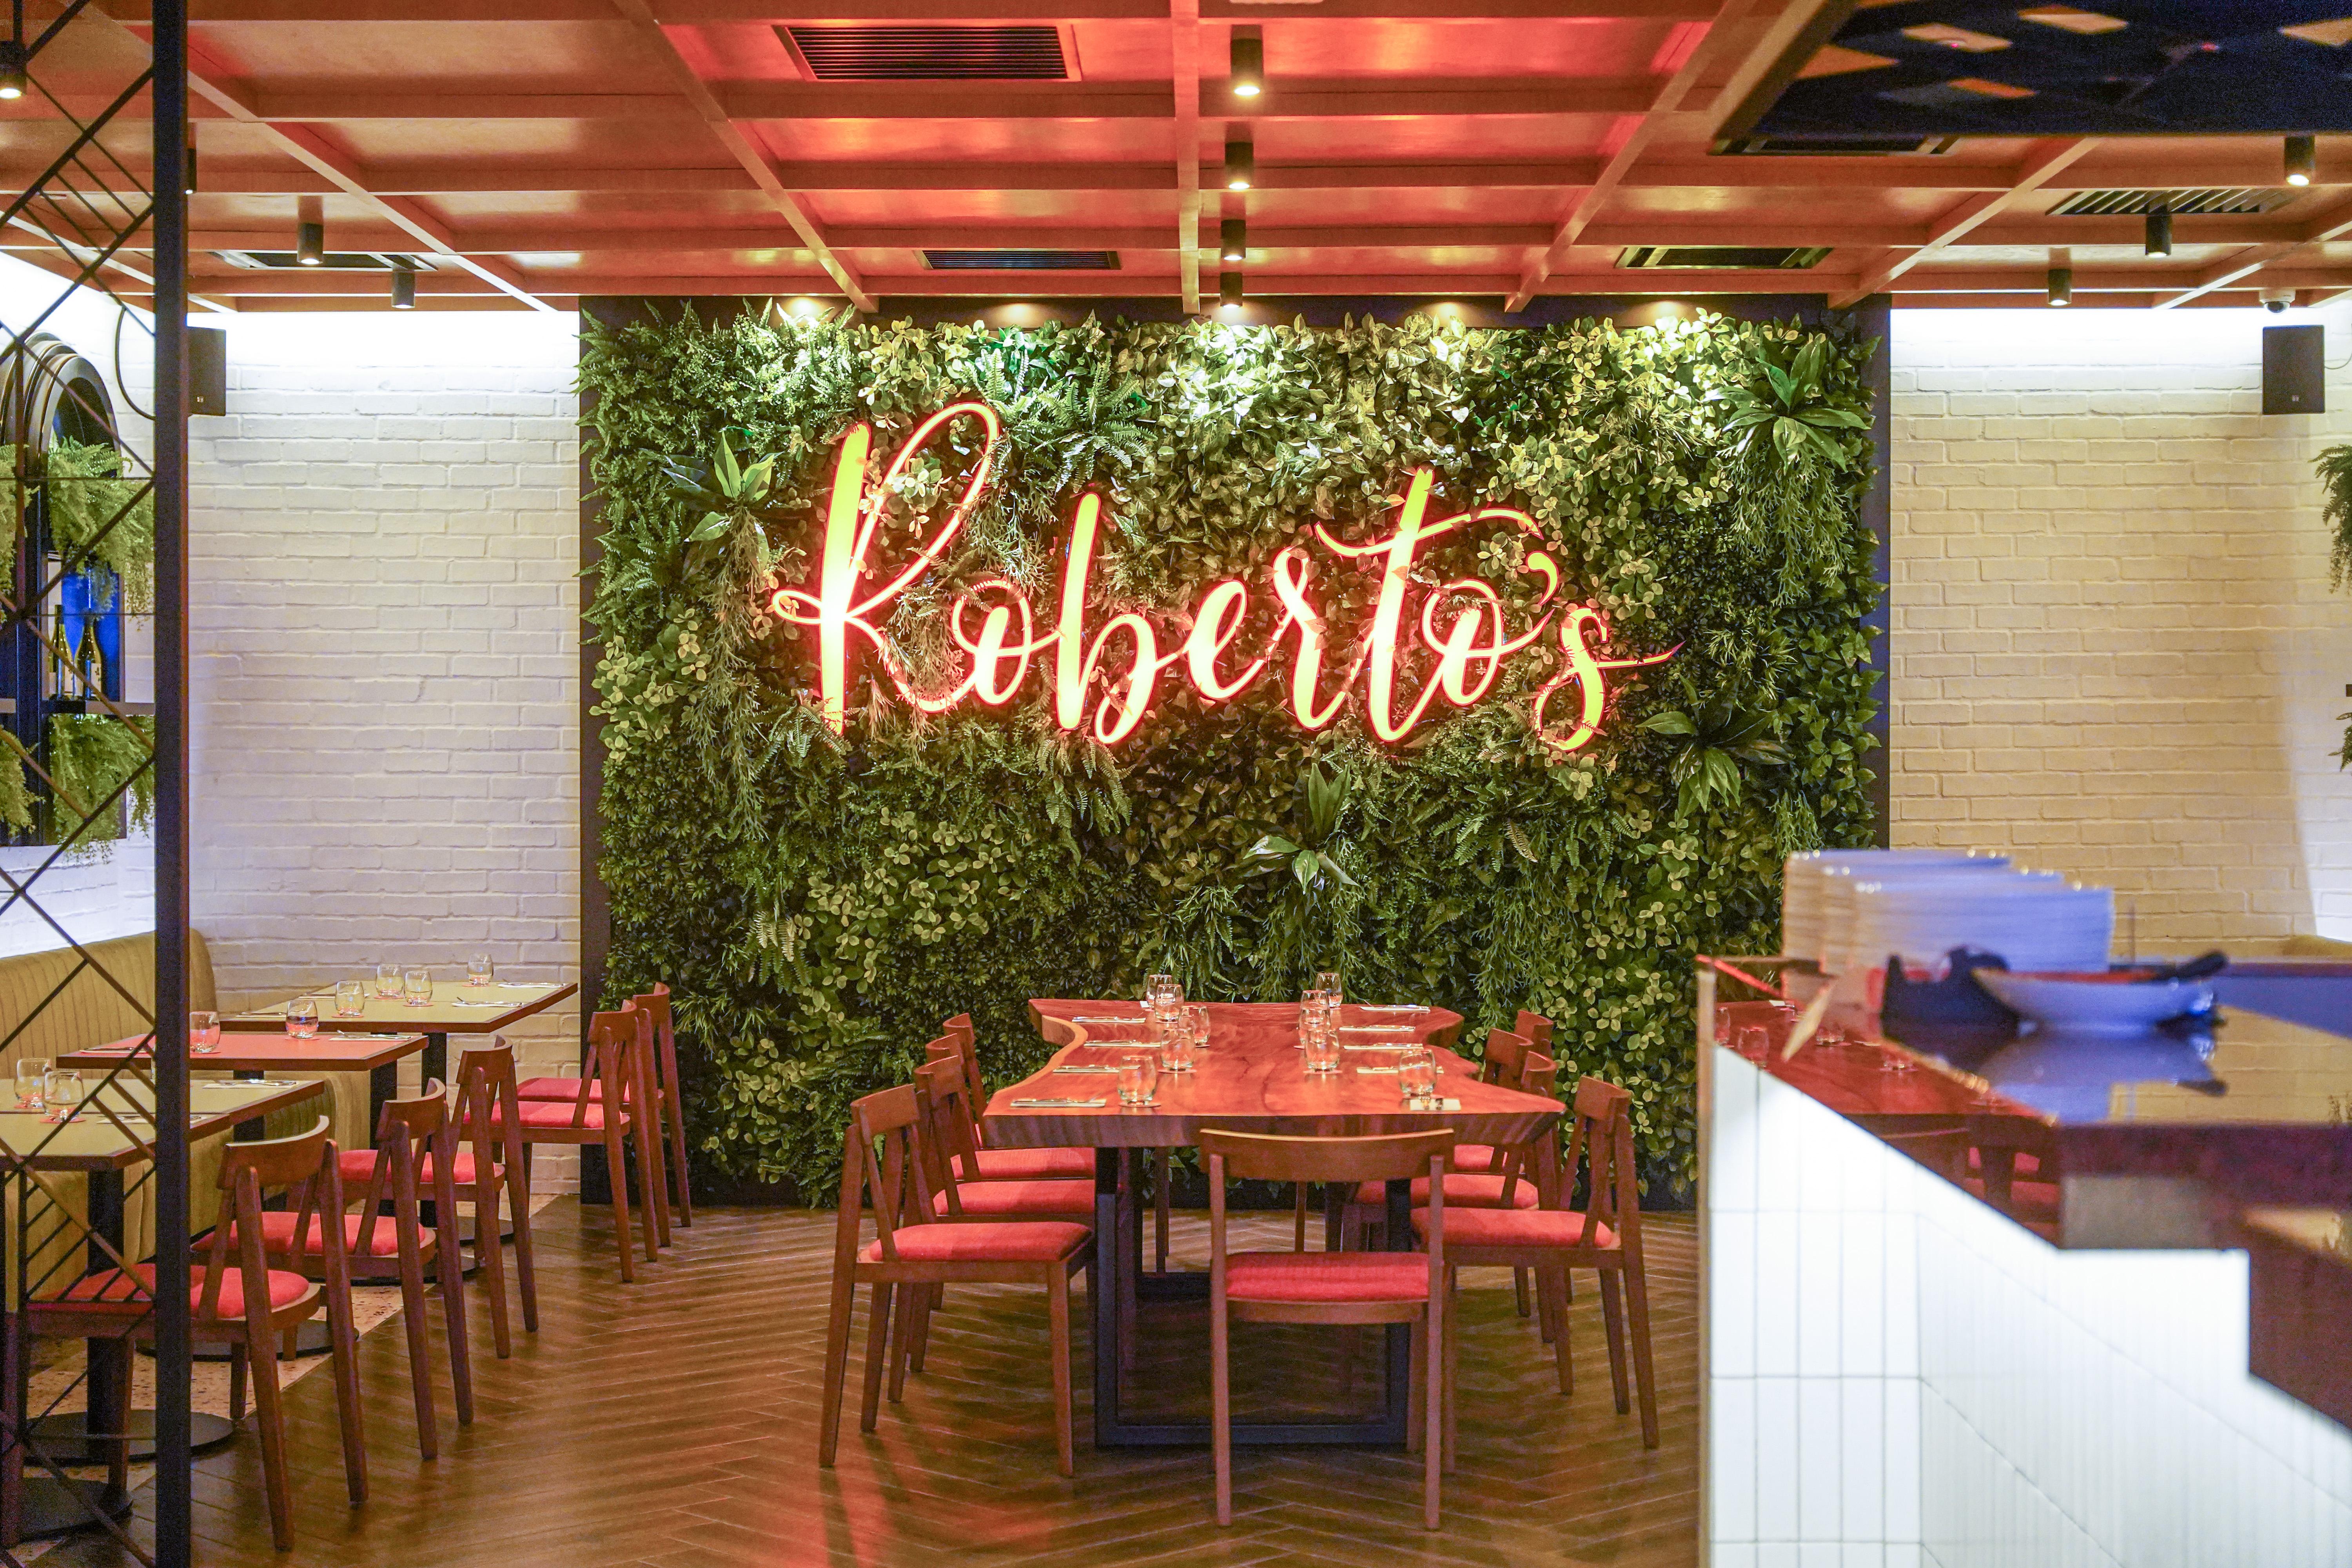 roberto's osteria: relish italian-inspired flavours & flair in tropicana gardens mall